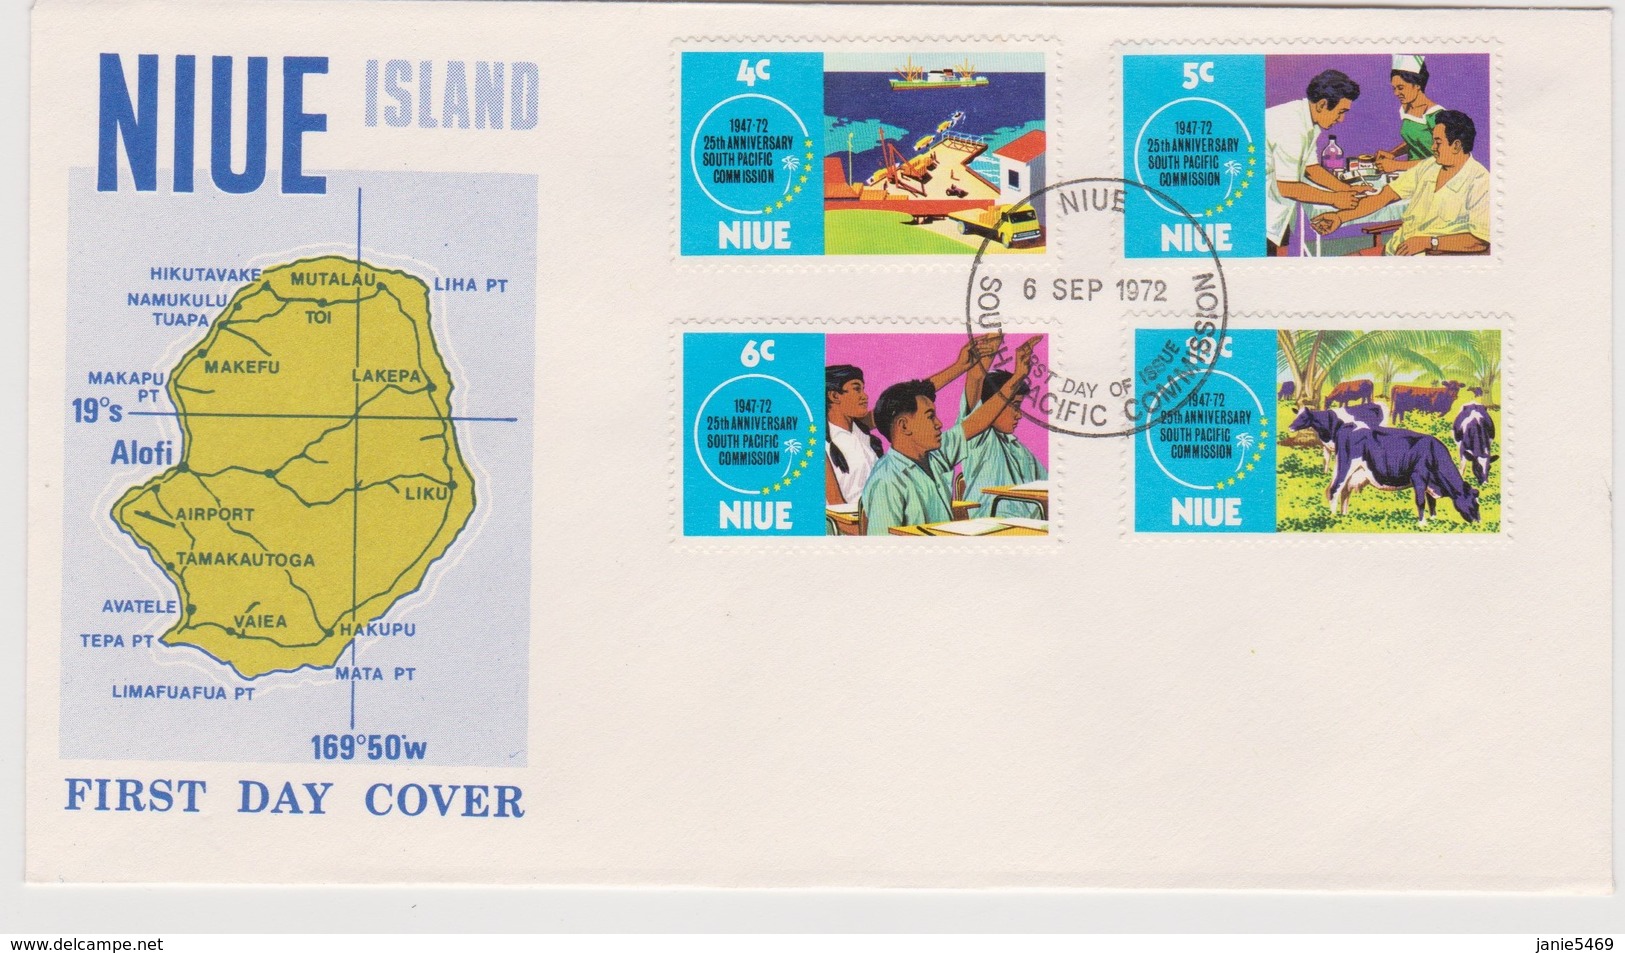 Niue 1972 25th Anniversary South Pacific Commission FDC - Niue